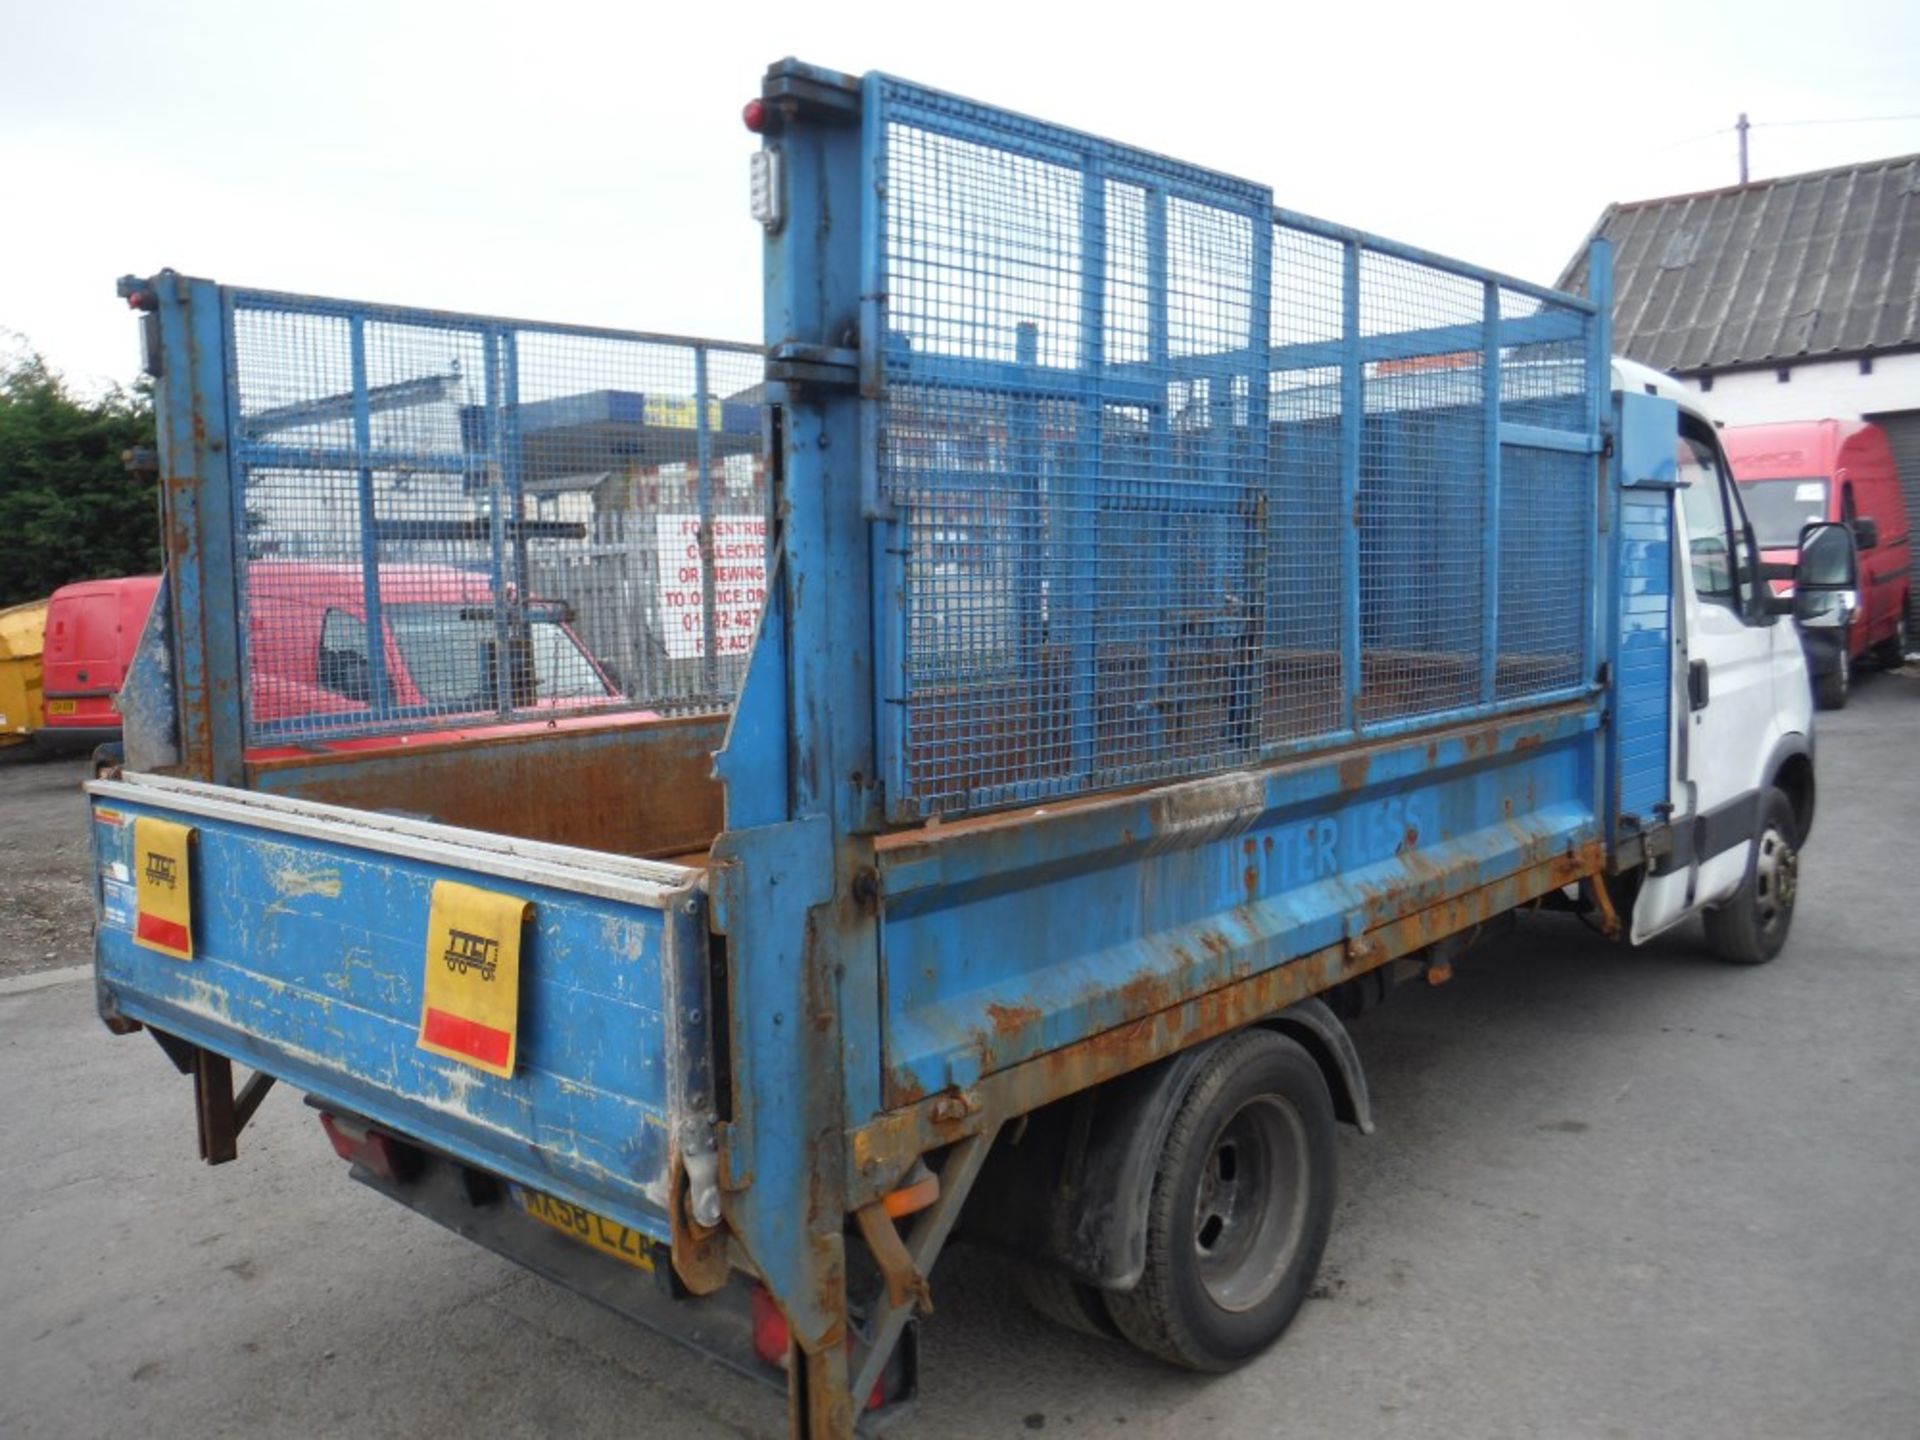 58 reg IVECO DAILY 50C15 CAGED TIPPER, 1ST REG 10/08, TEST 09/15, 117628M, V5 HERE, 1 OWNER FROM NEW - Image 4 of 5